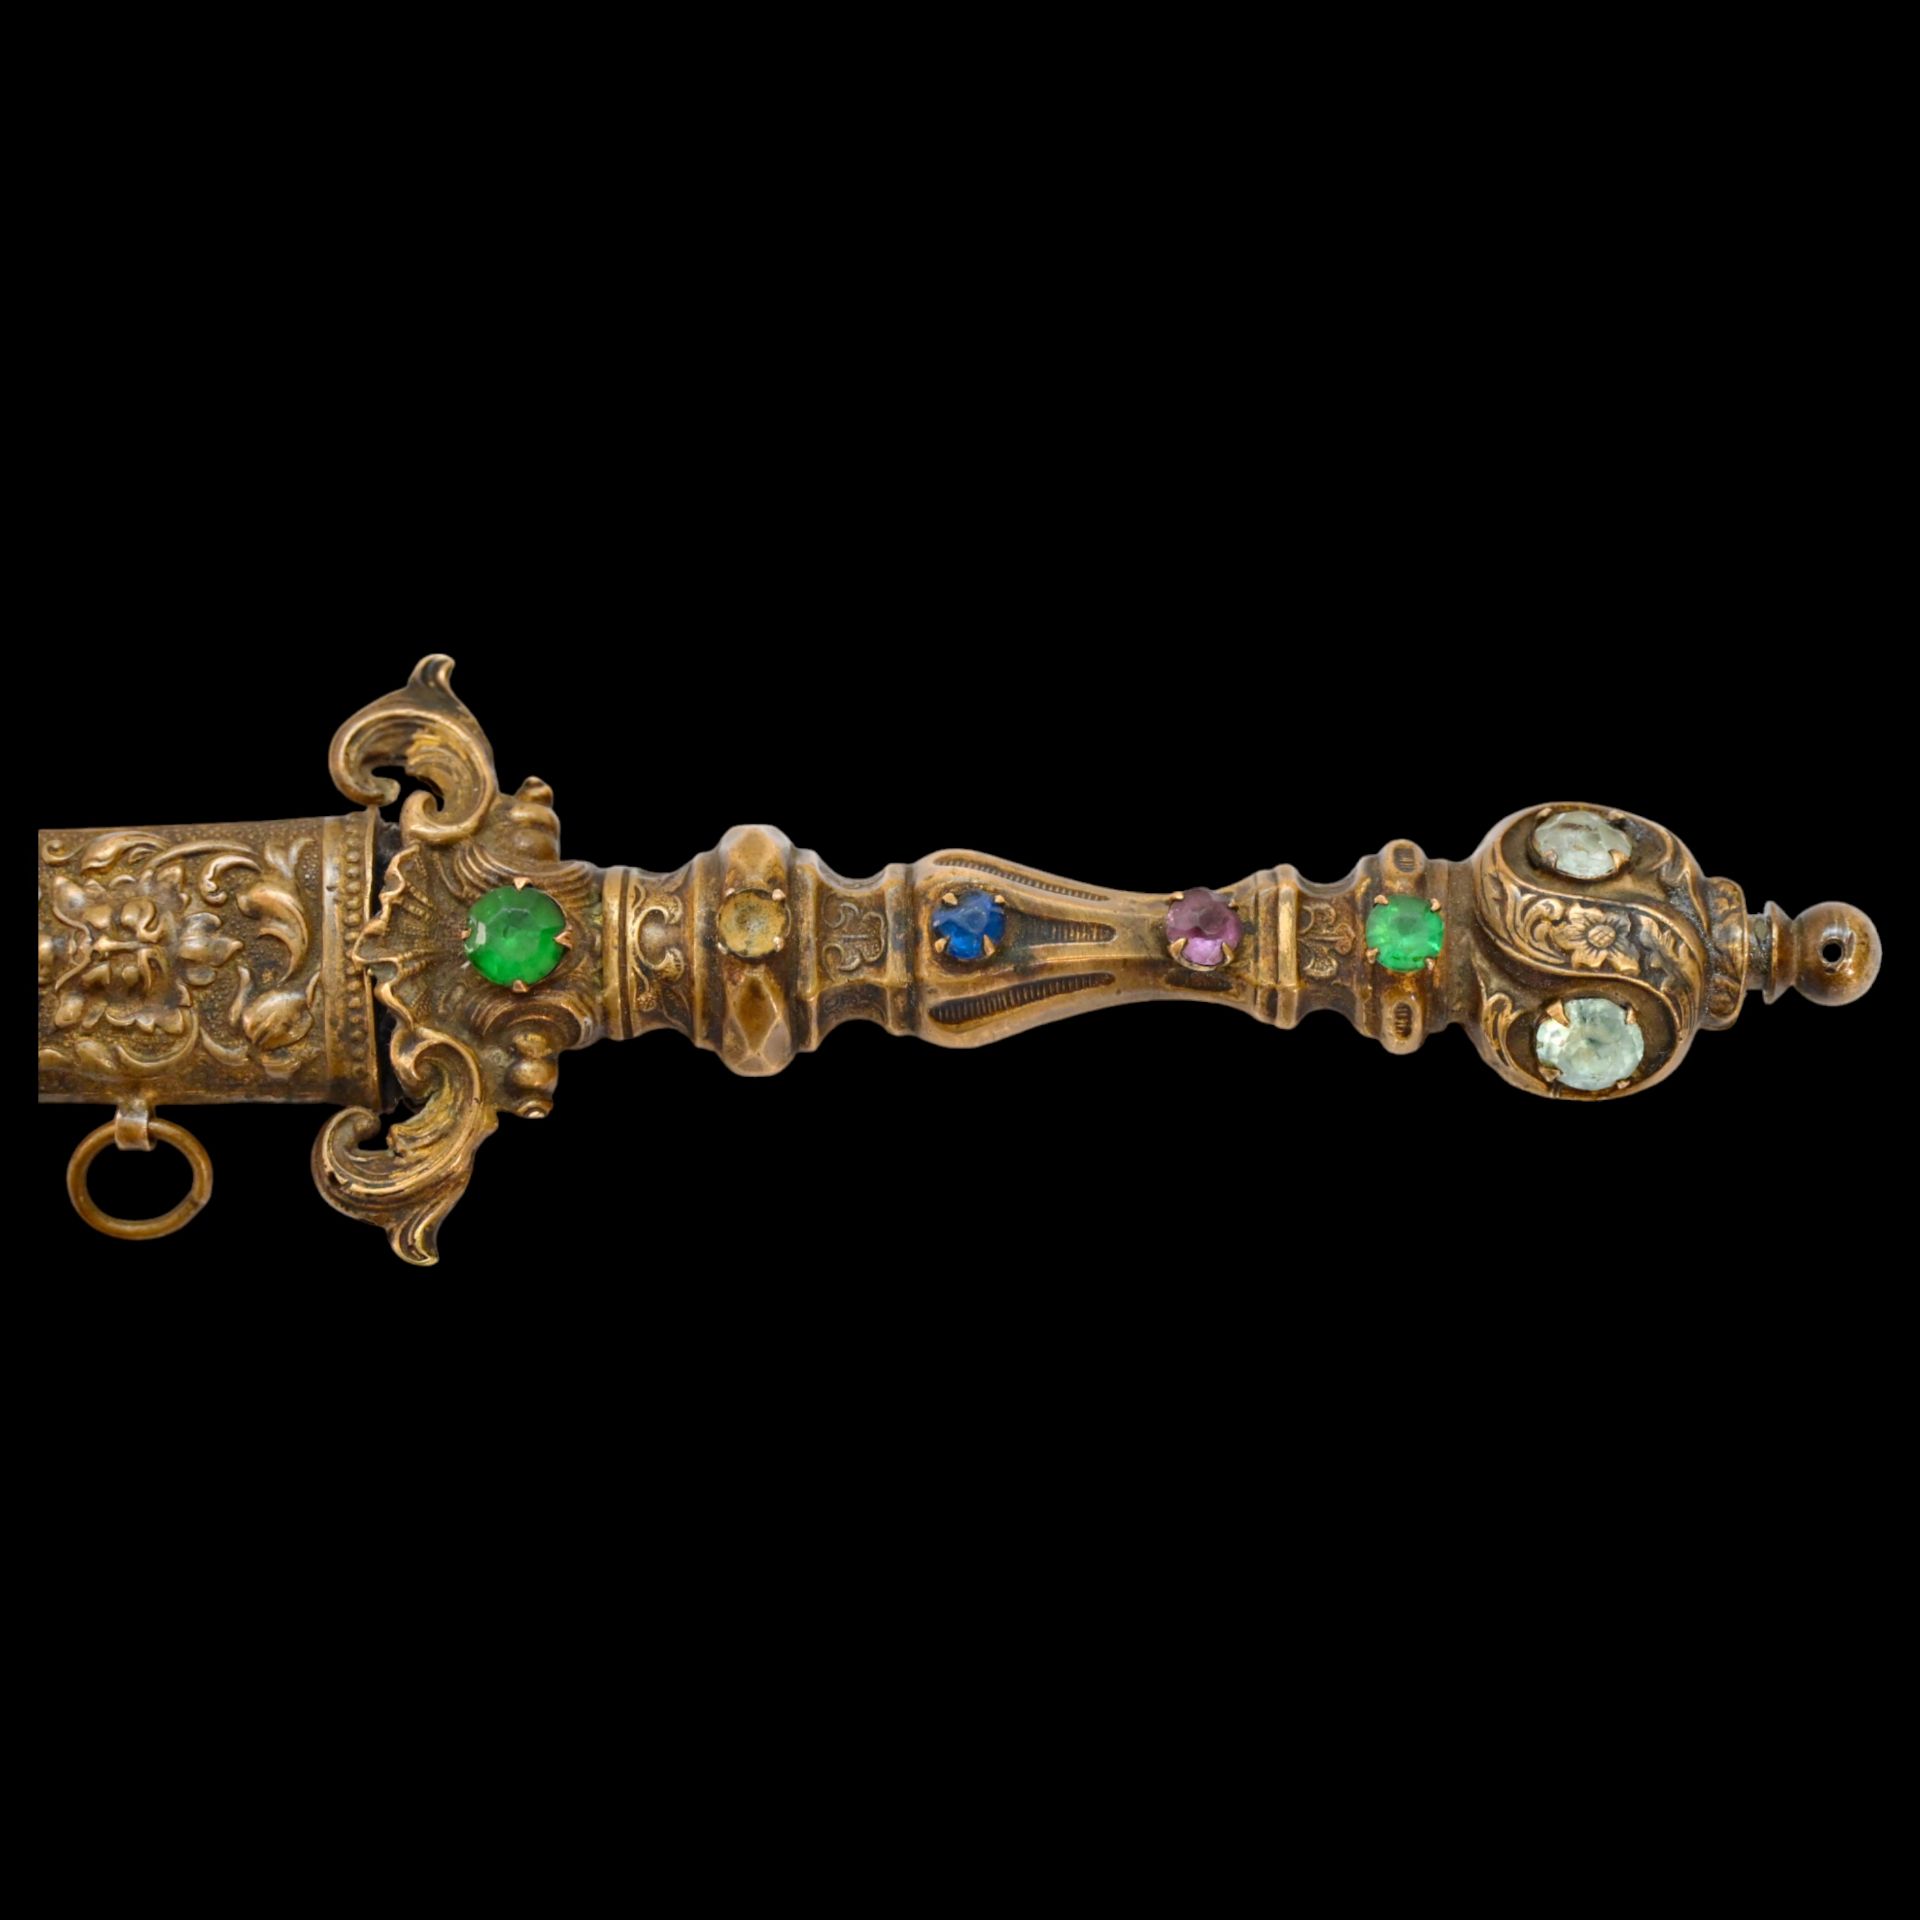 A Very high quality Dagger Renaissance Style Brass with inlaid colored stones, 19th century. - Image 3 of 9